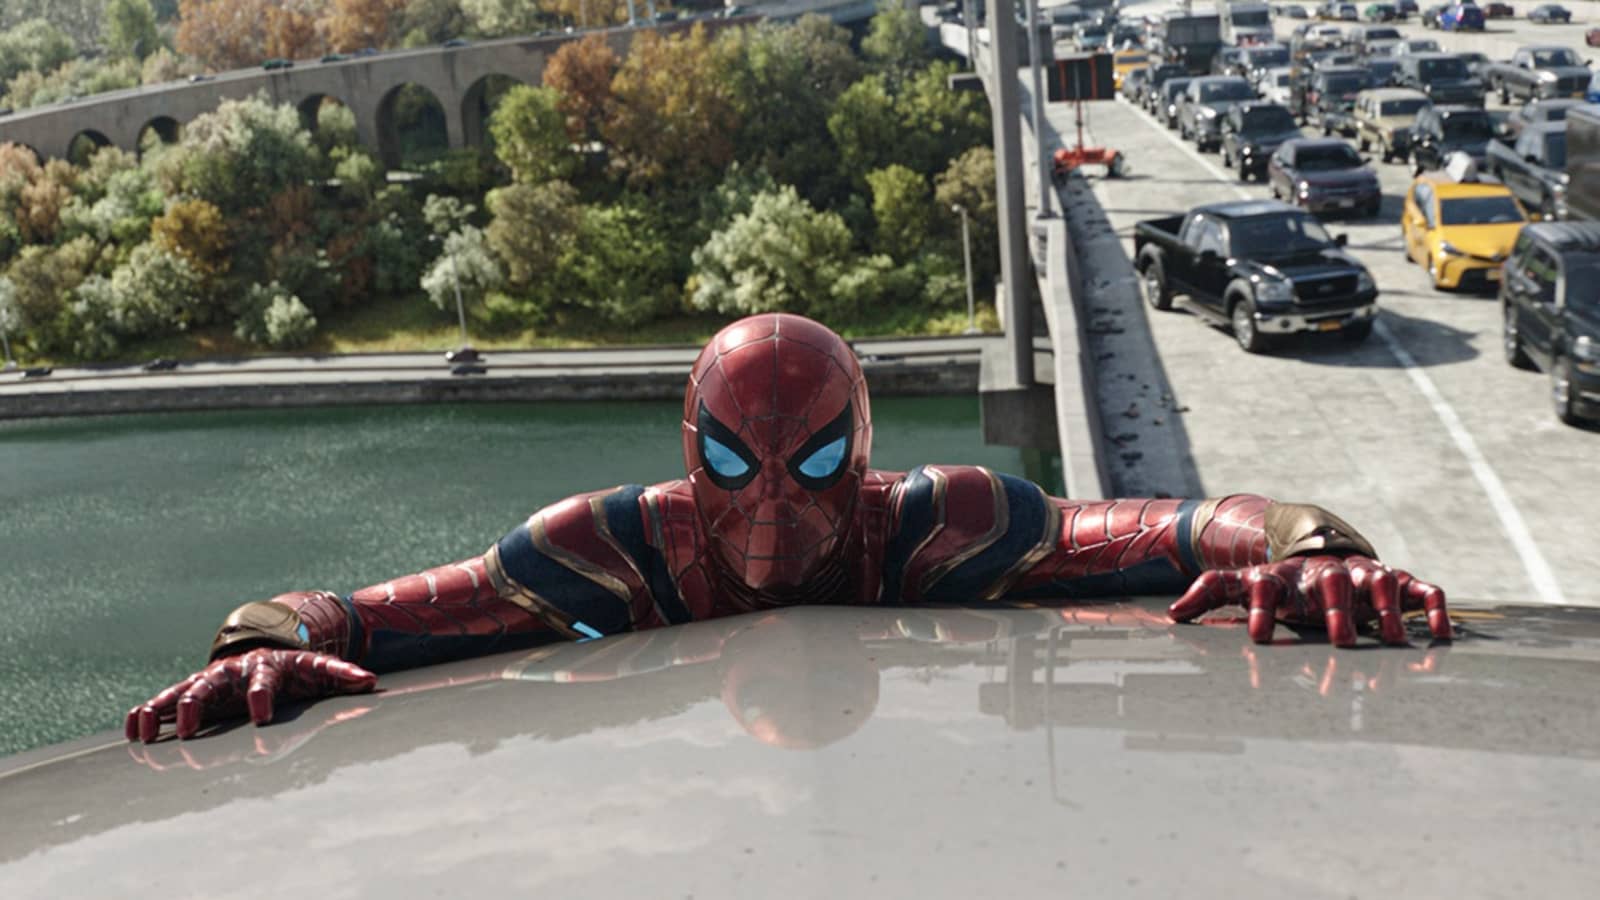 ‘Spider-Man: No Way Home’ Becomes A Finalist In The Academy’s #OscarsFanFavorite Award Poll